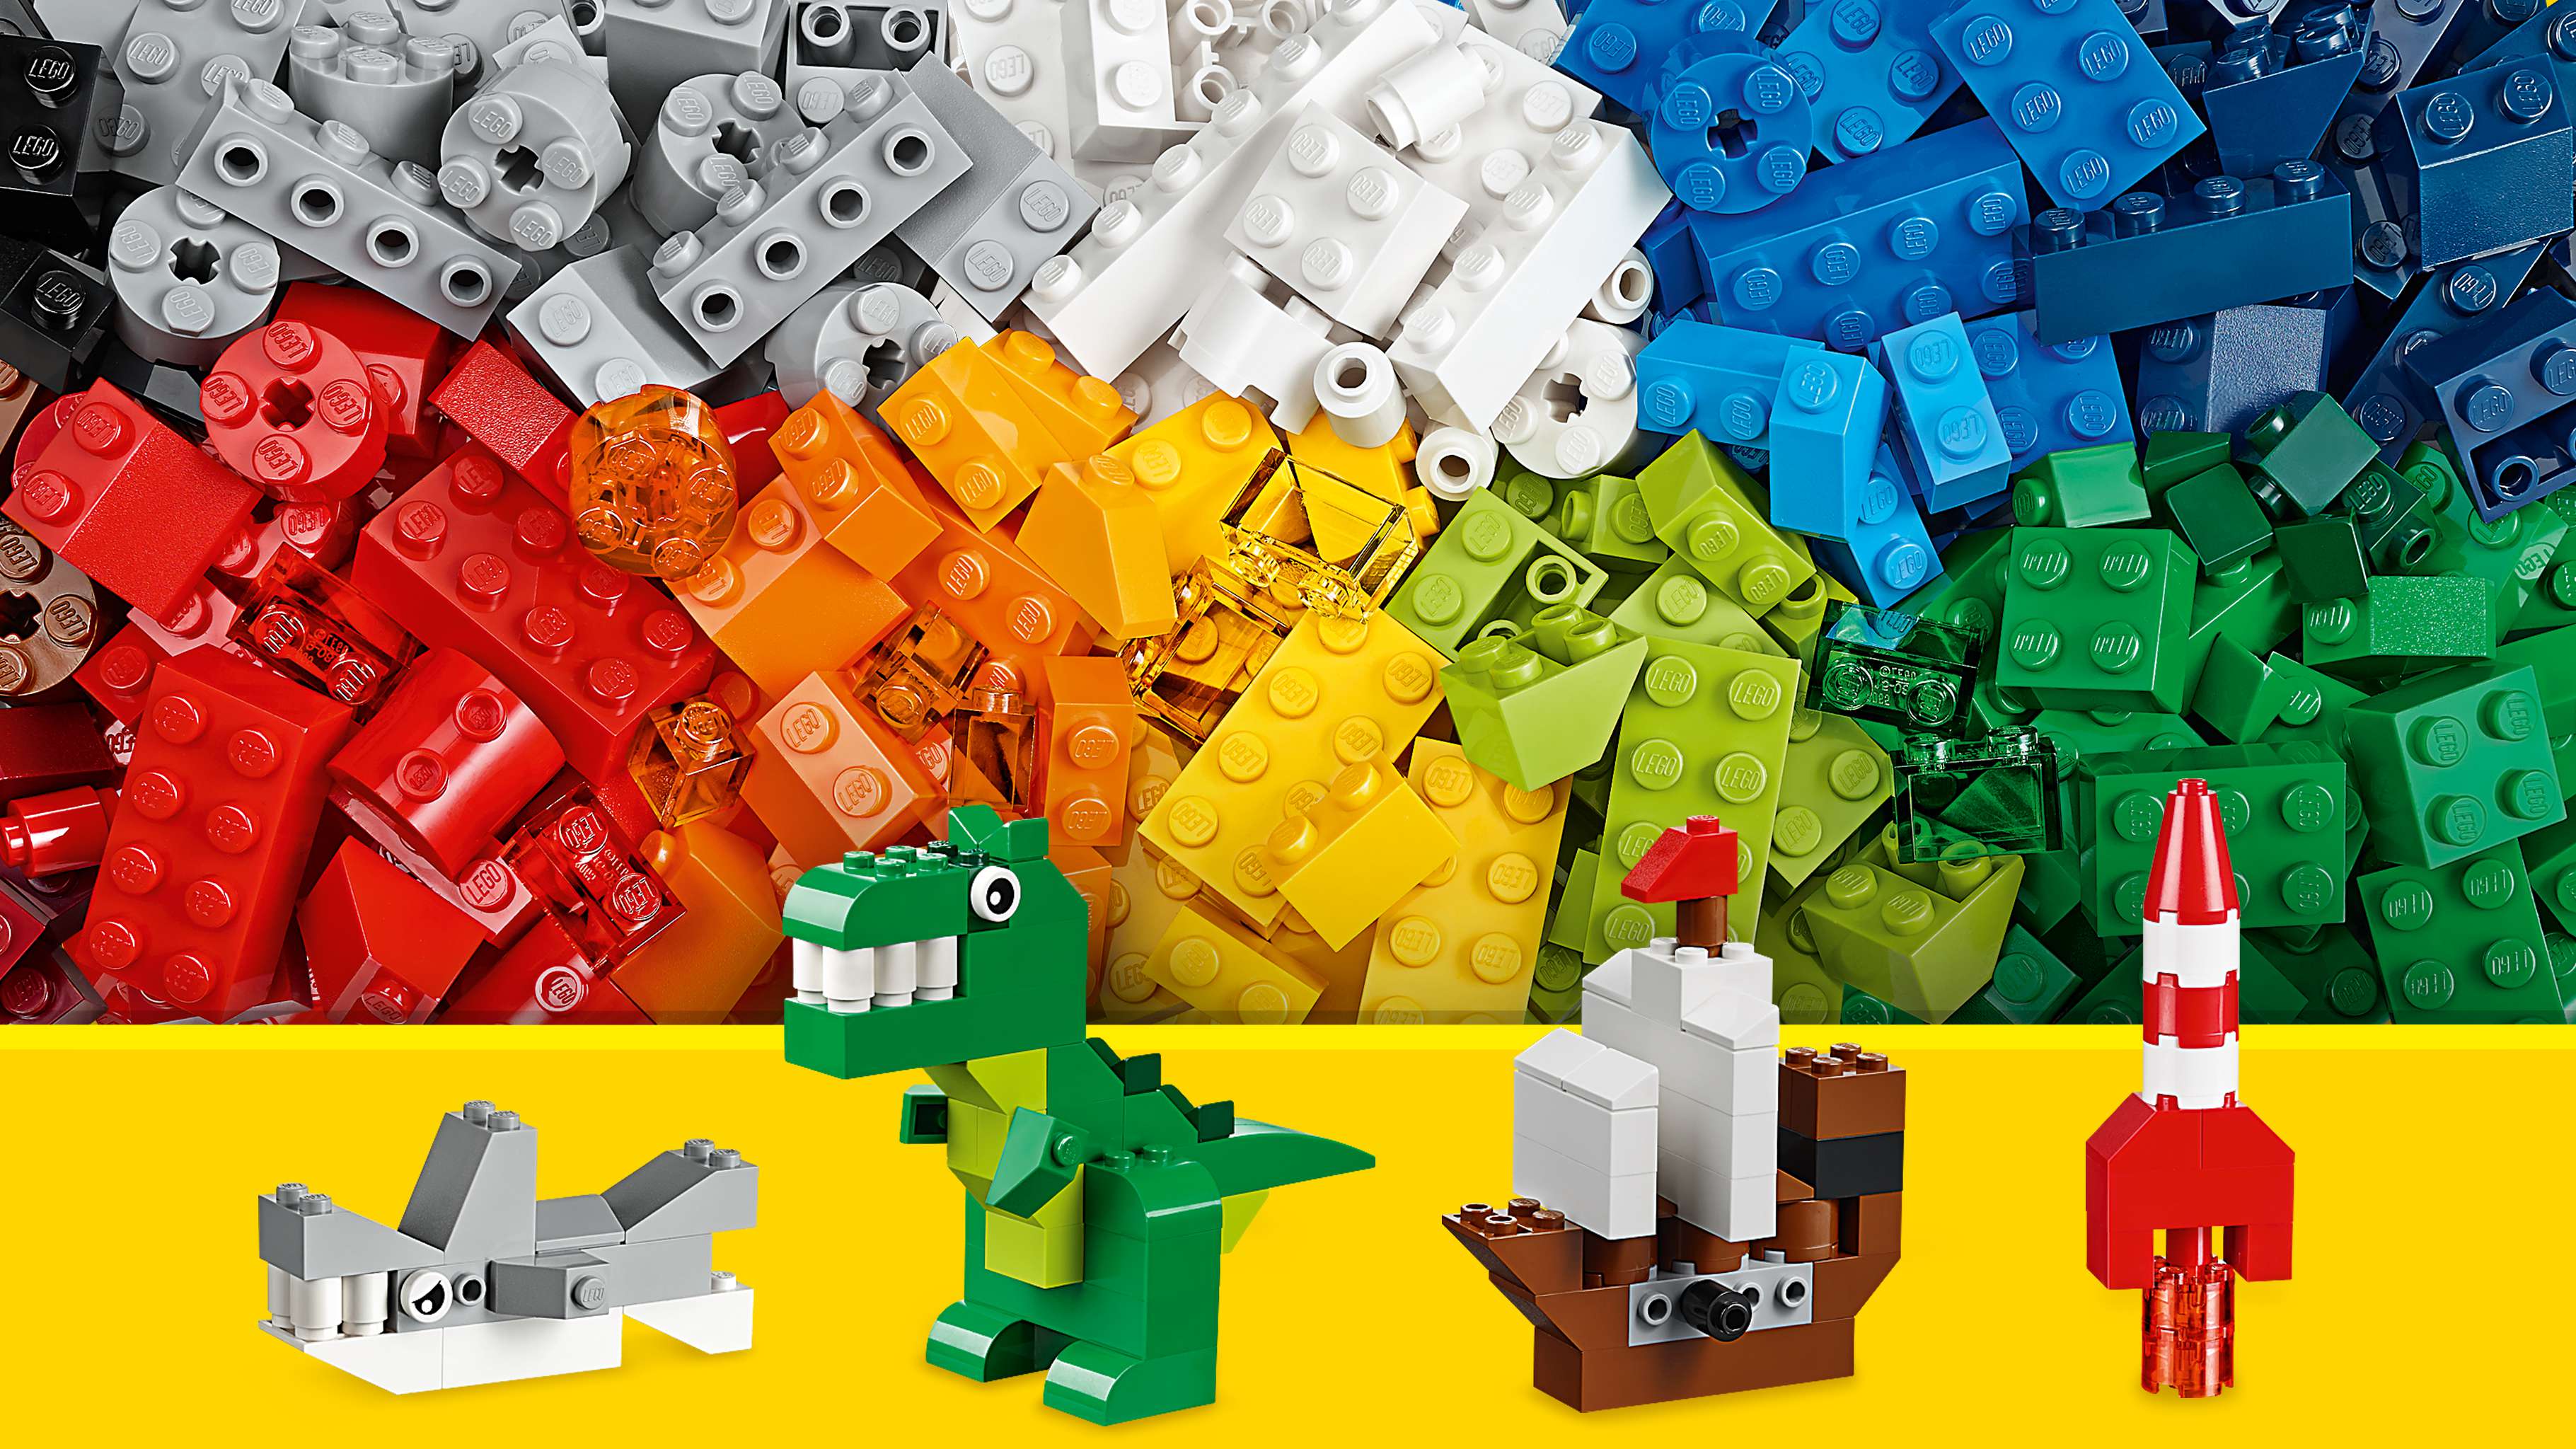 LEGO Classic Creative Supplement - 10693 - Use a mix of different colored bricks to build a shark, a dinosaur a pirate ship or a space rocket.